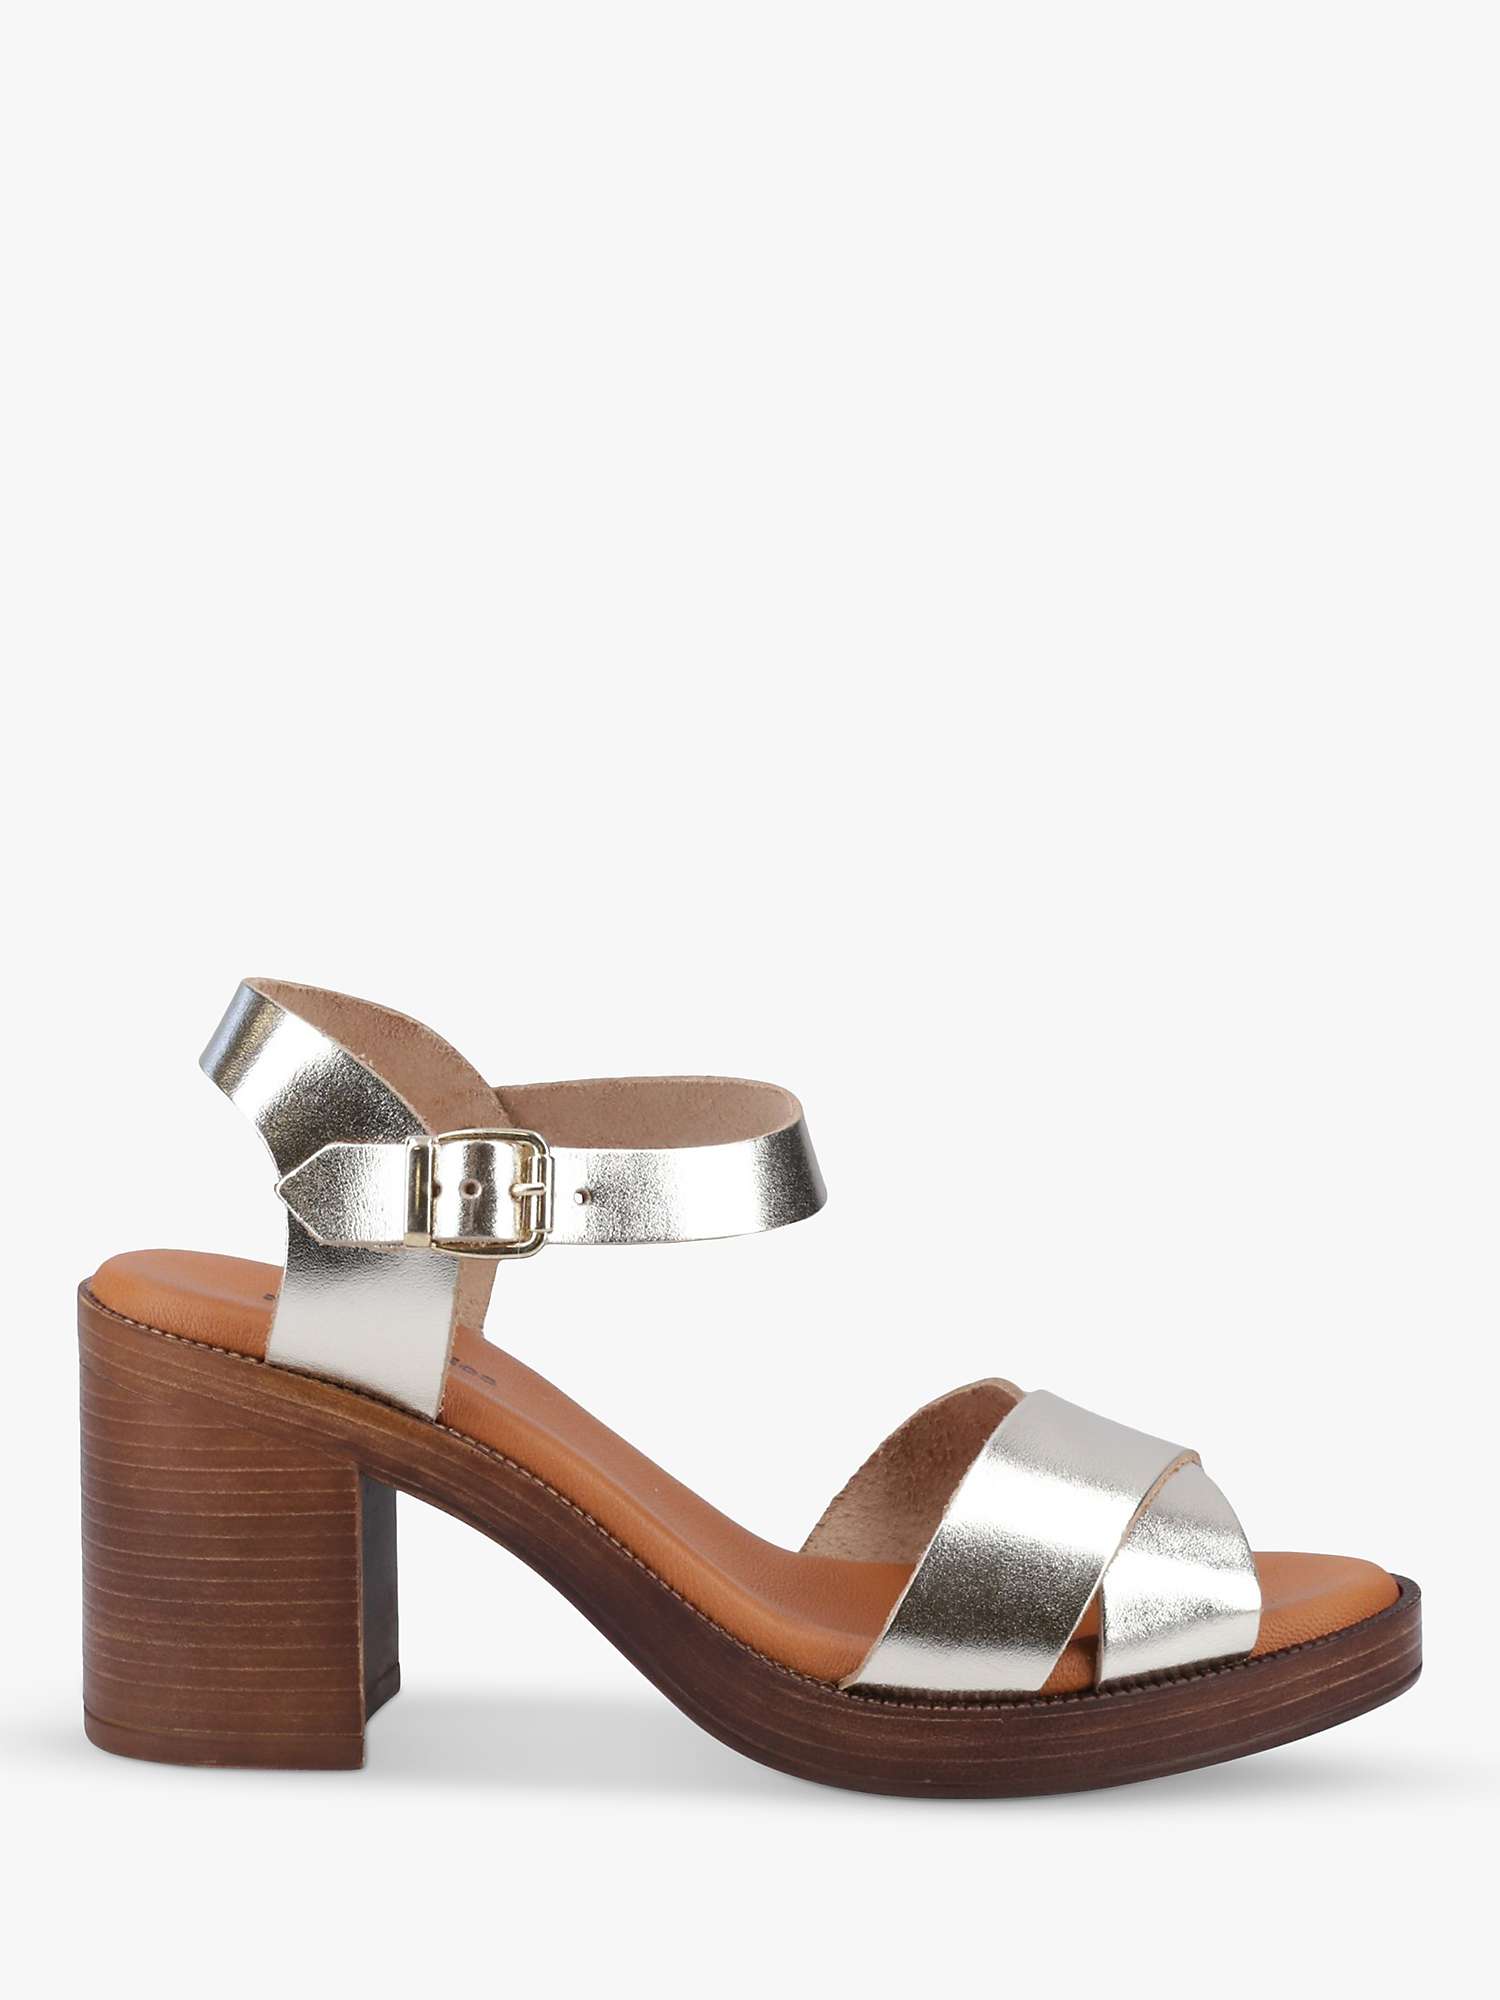 Buy Hush Puppies Georgia Leather Buckle Sandal, Gold Online at johnlewis.com